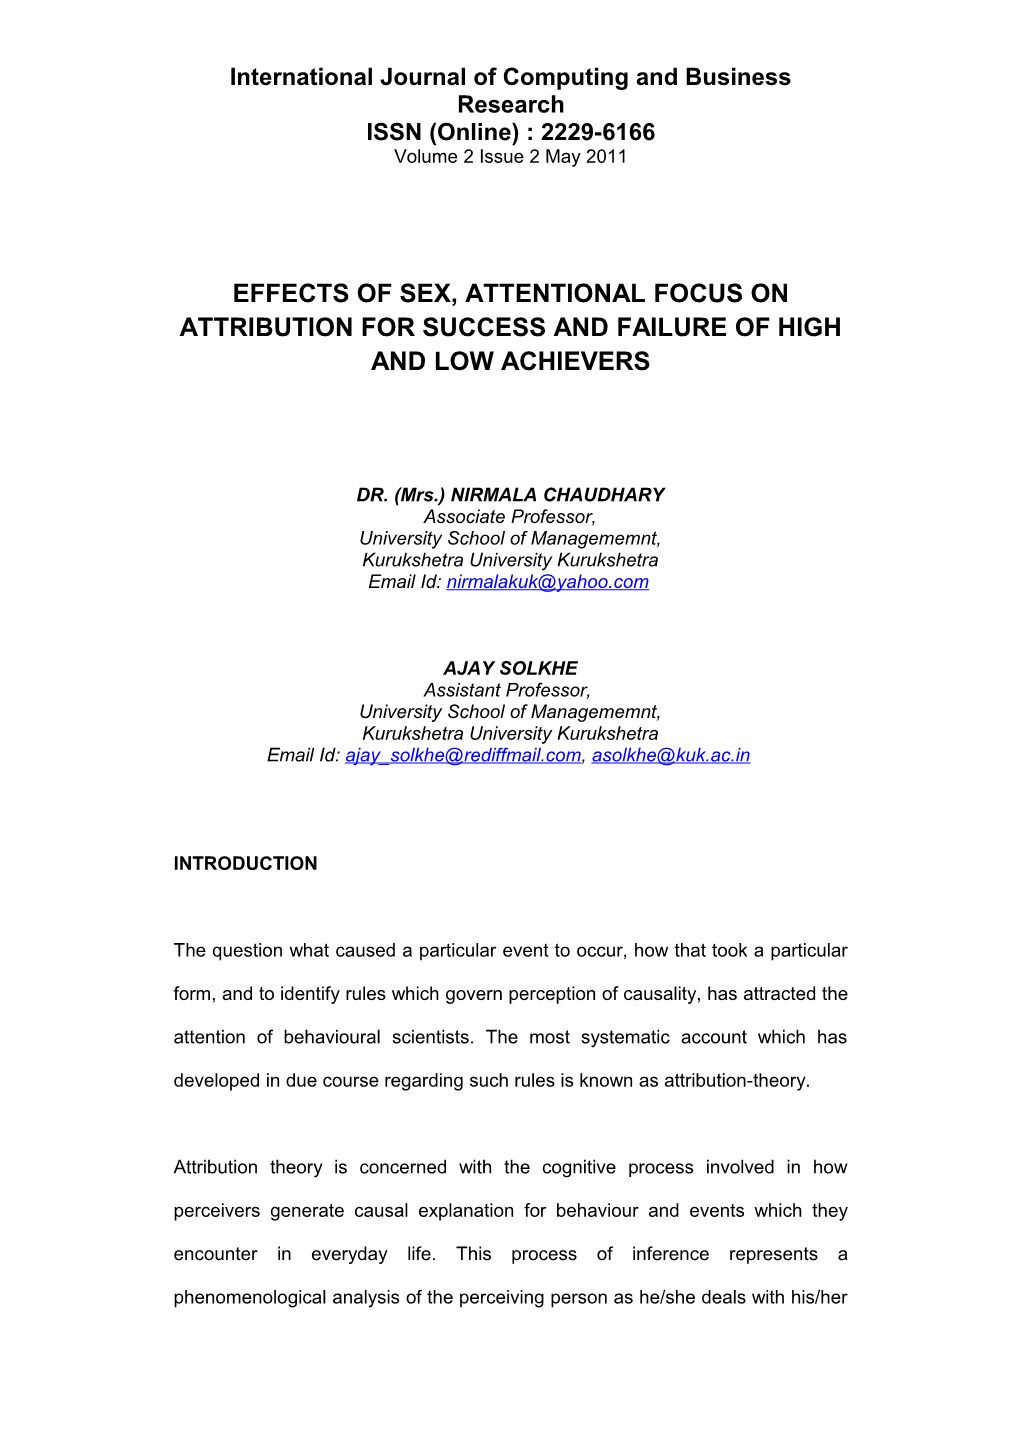 Effects of Sex, Attentional Focus on Attribution for Success and Failure of High and Low